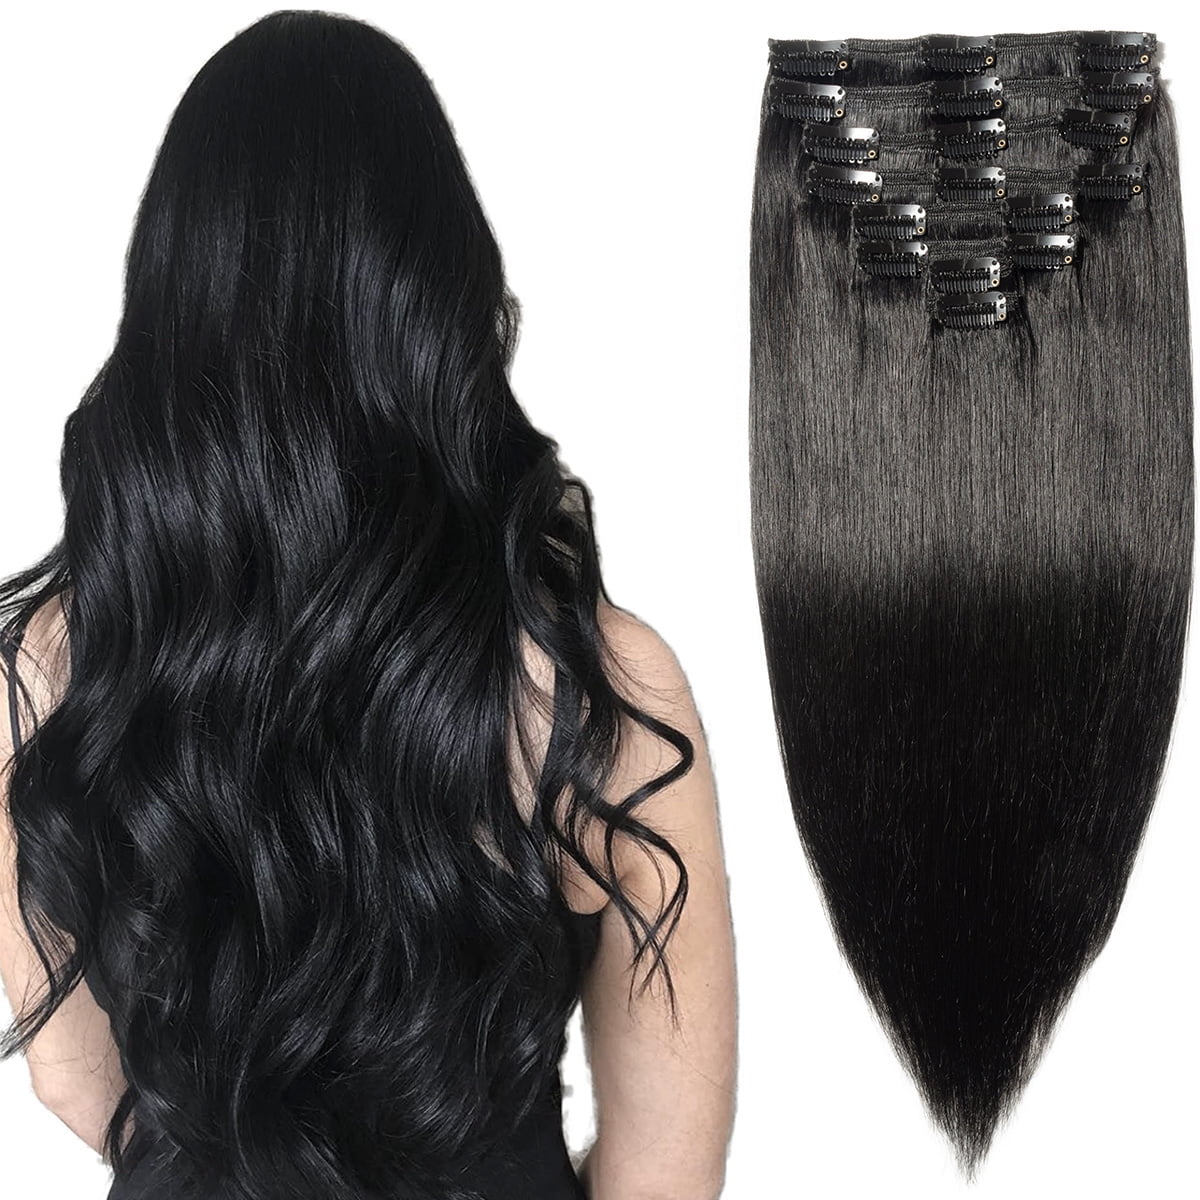 26 inch weft hair extensions